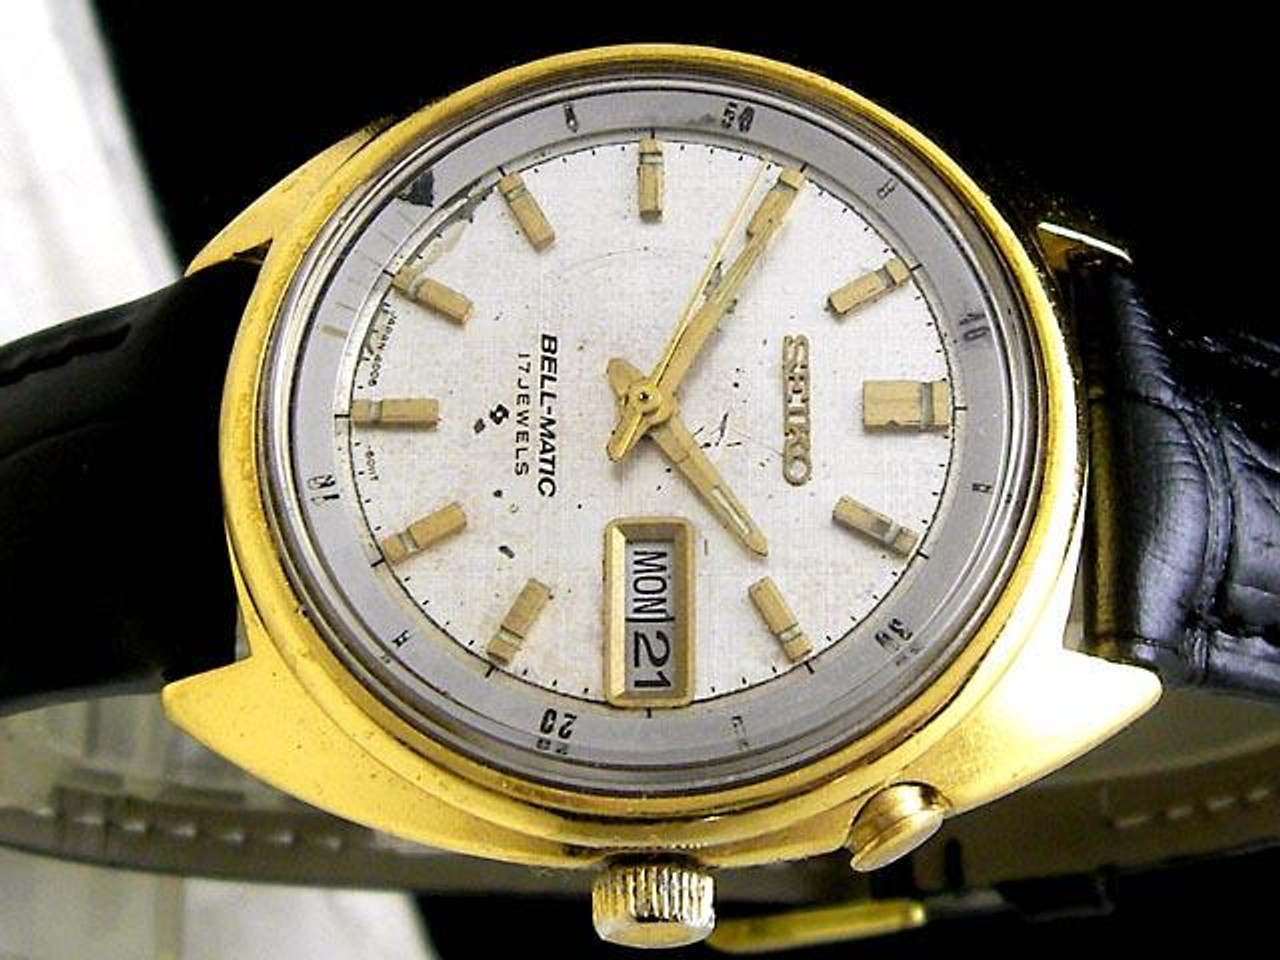 Seiko Bell Matic 4006-6011 Vintage Day Date 17 jewels Automatic Mens Watch  - Japan Pre-owned Vintage